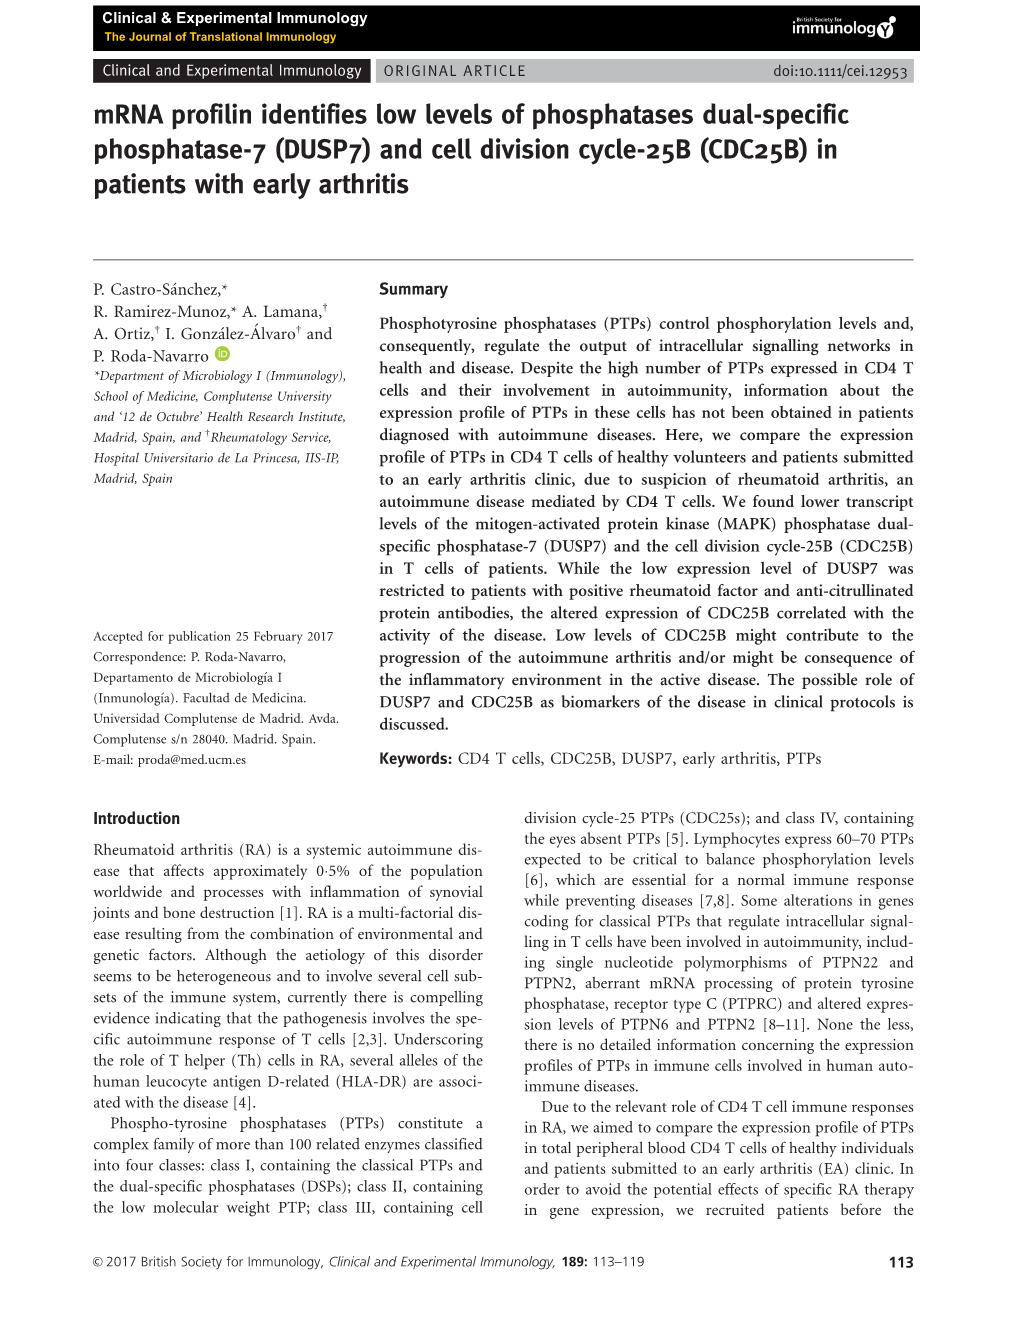 (DUSP7) and Cell Division Cycle-25B (CDC25B) in Patients with Early Arthritis